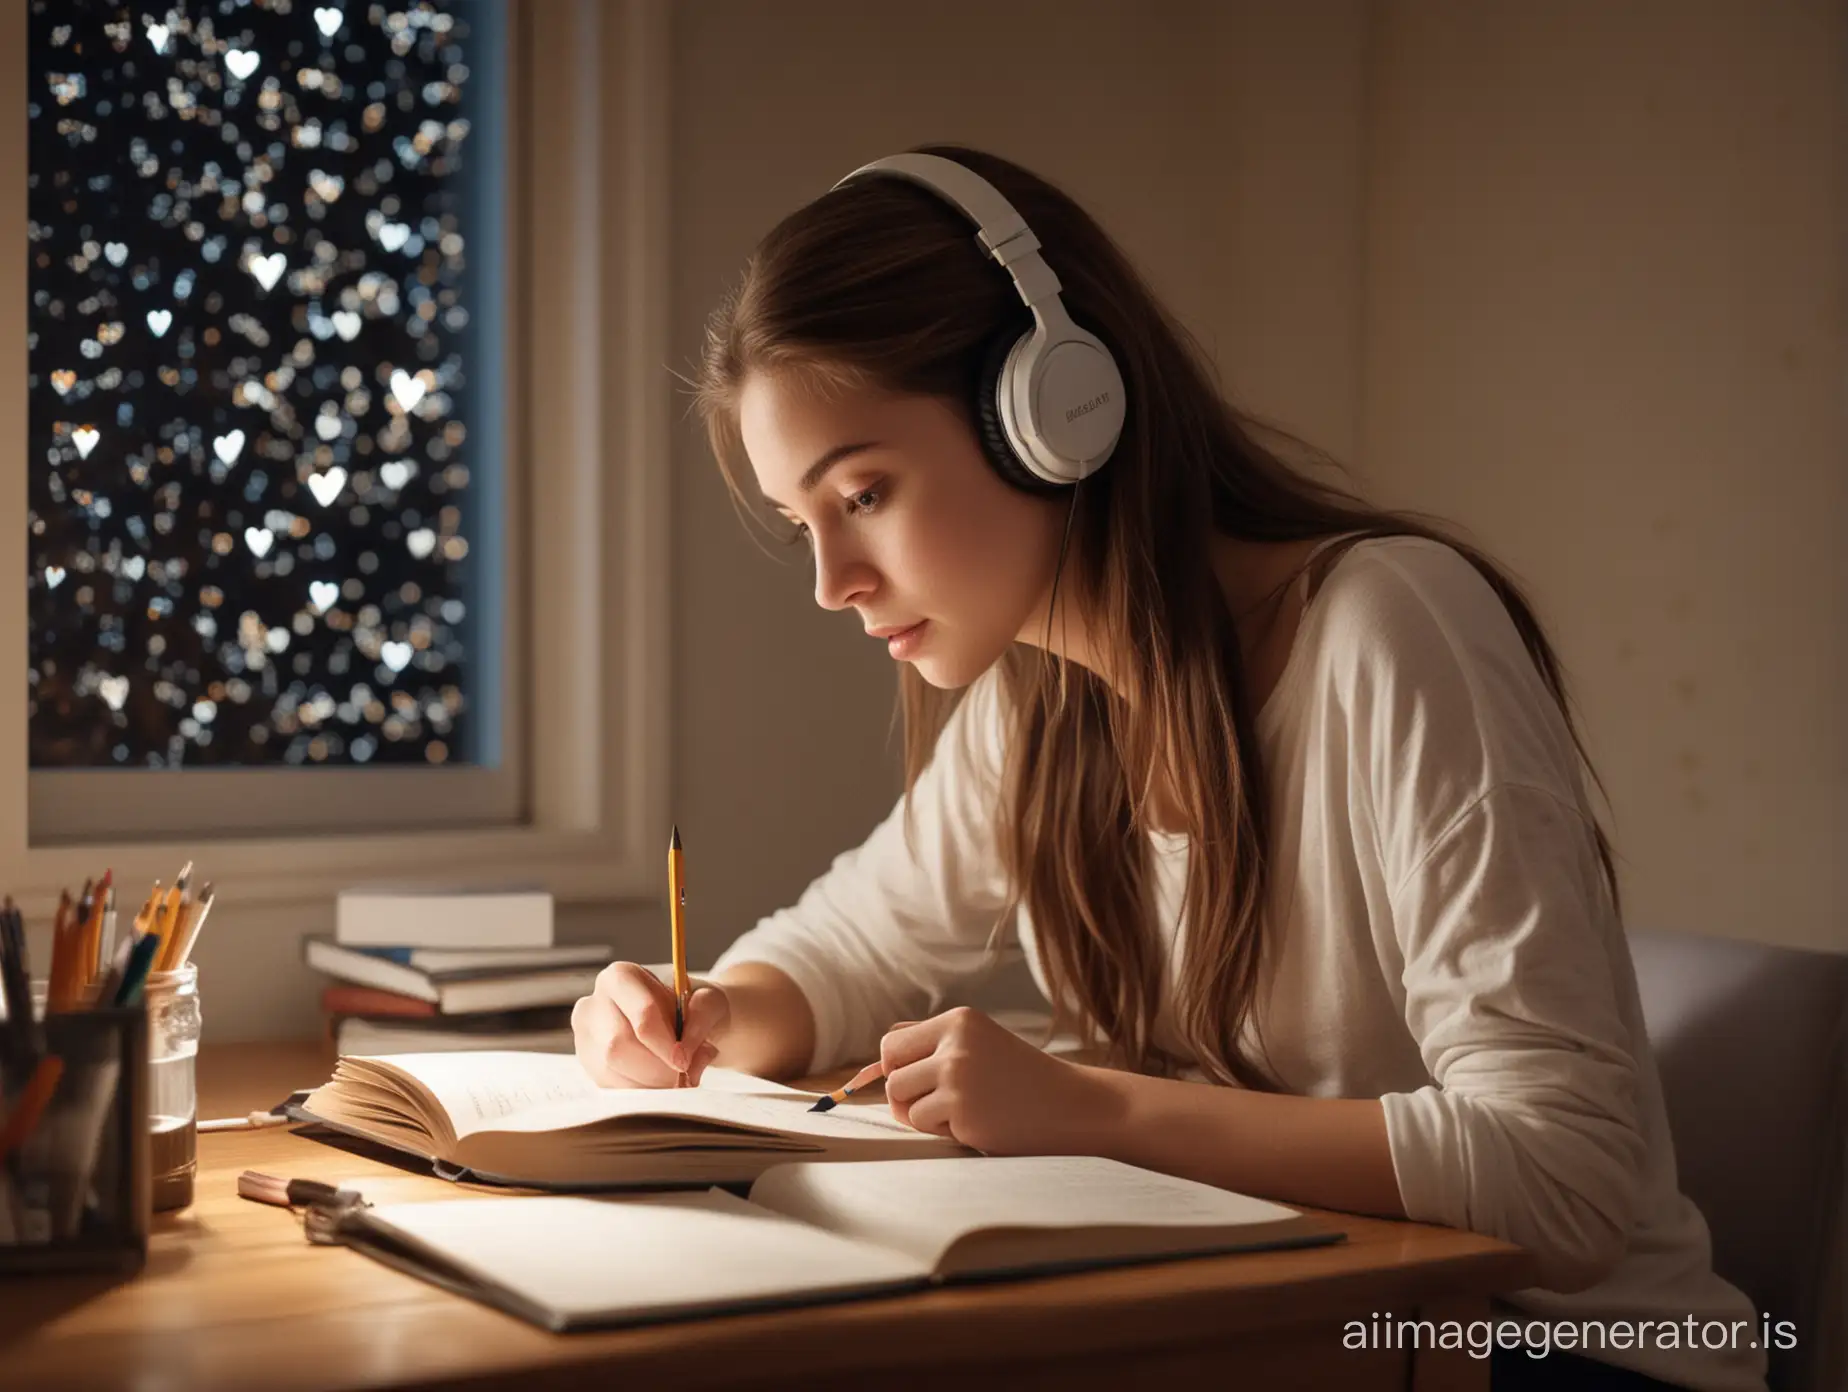 Young-Woman-Studying-Alone-in-Serene-Room-with-Night-Sky-View